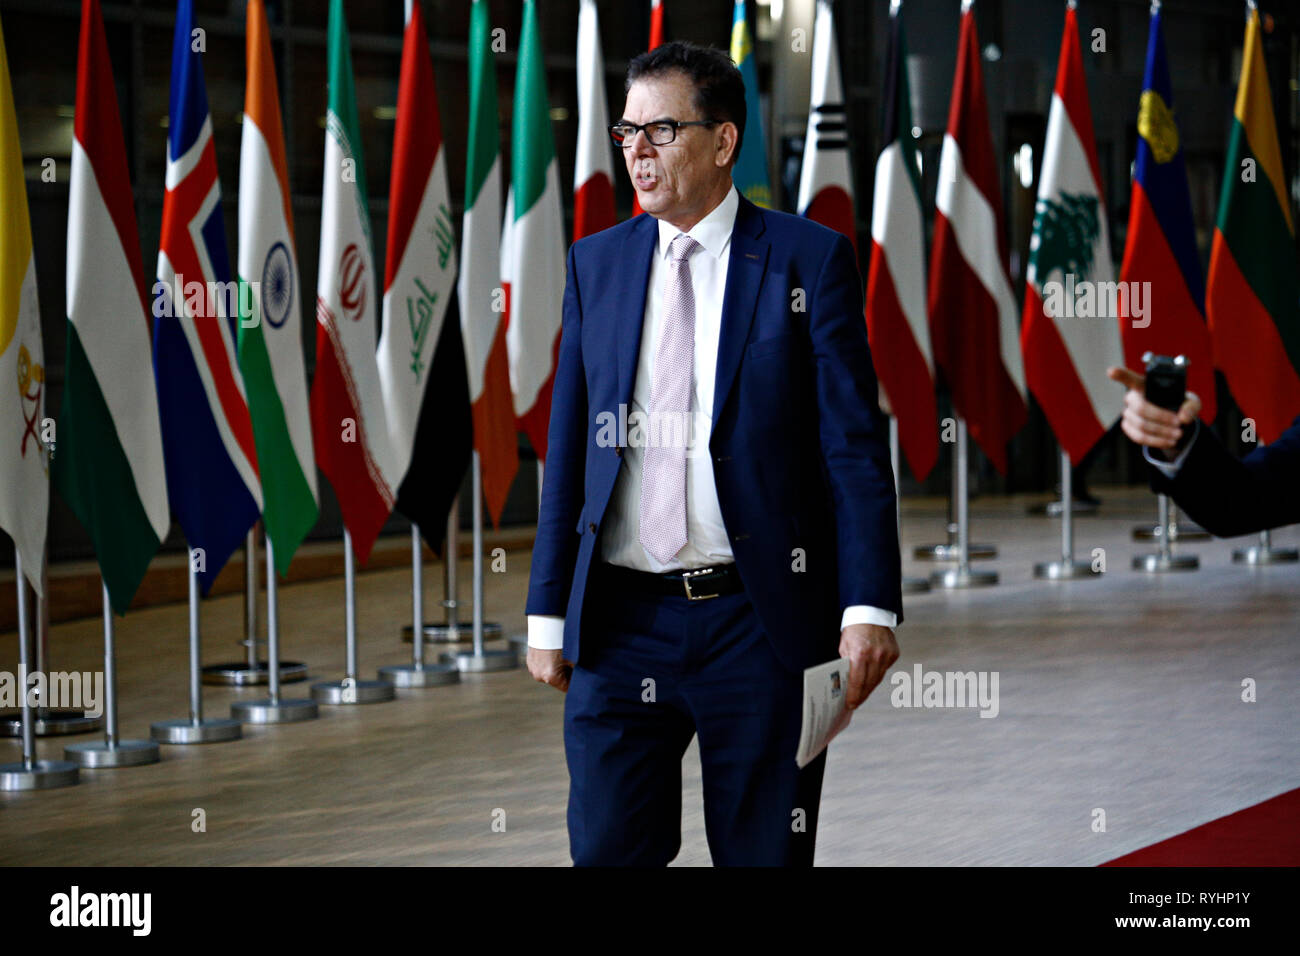 Brussels, Belgium. 14th March 2019. Gerd MÜLLER, Federal Minister of Economic Cooperation and Development of Germany arrives to attend in international conference on the future of Syria and the region. Credit: ALEXANDROS MICHAILIDIS/Alamy Live News Stock Photo